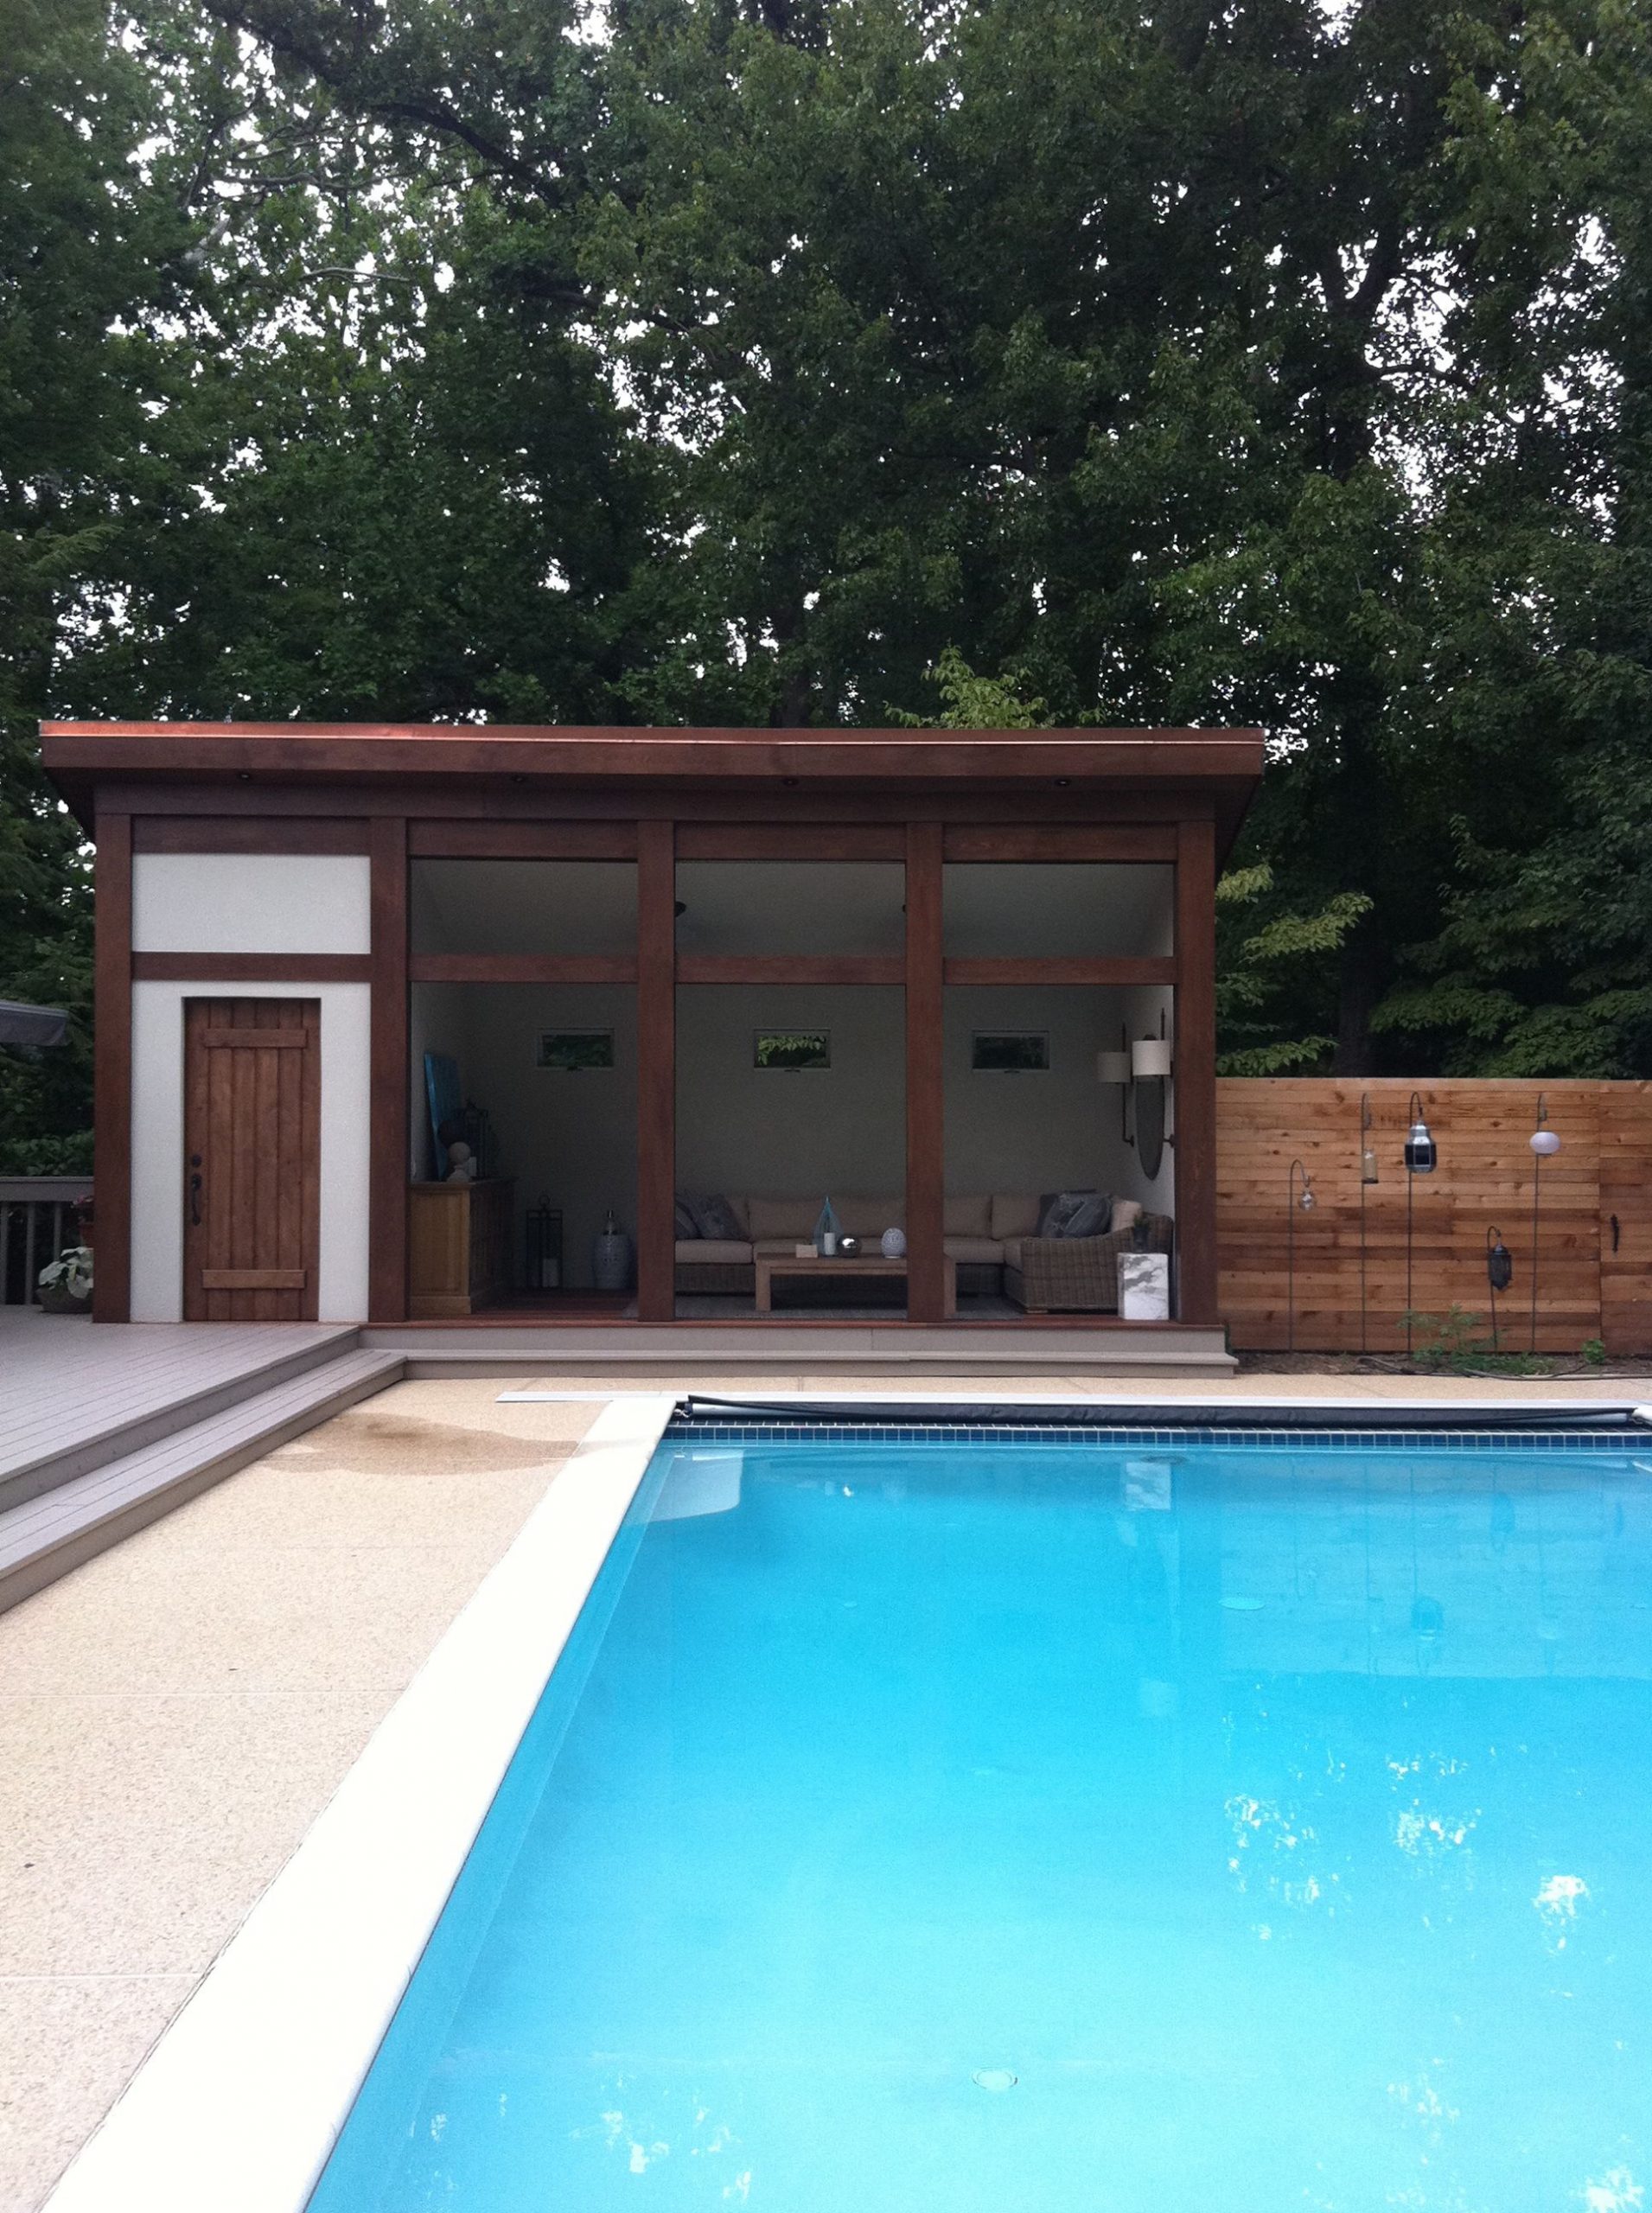 Pin By Lookie On For The Pool Area | Pool Houses, Pool avec Pool House Composite